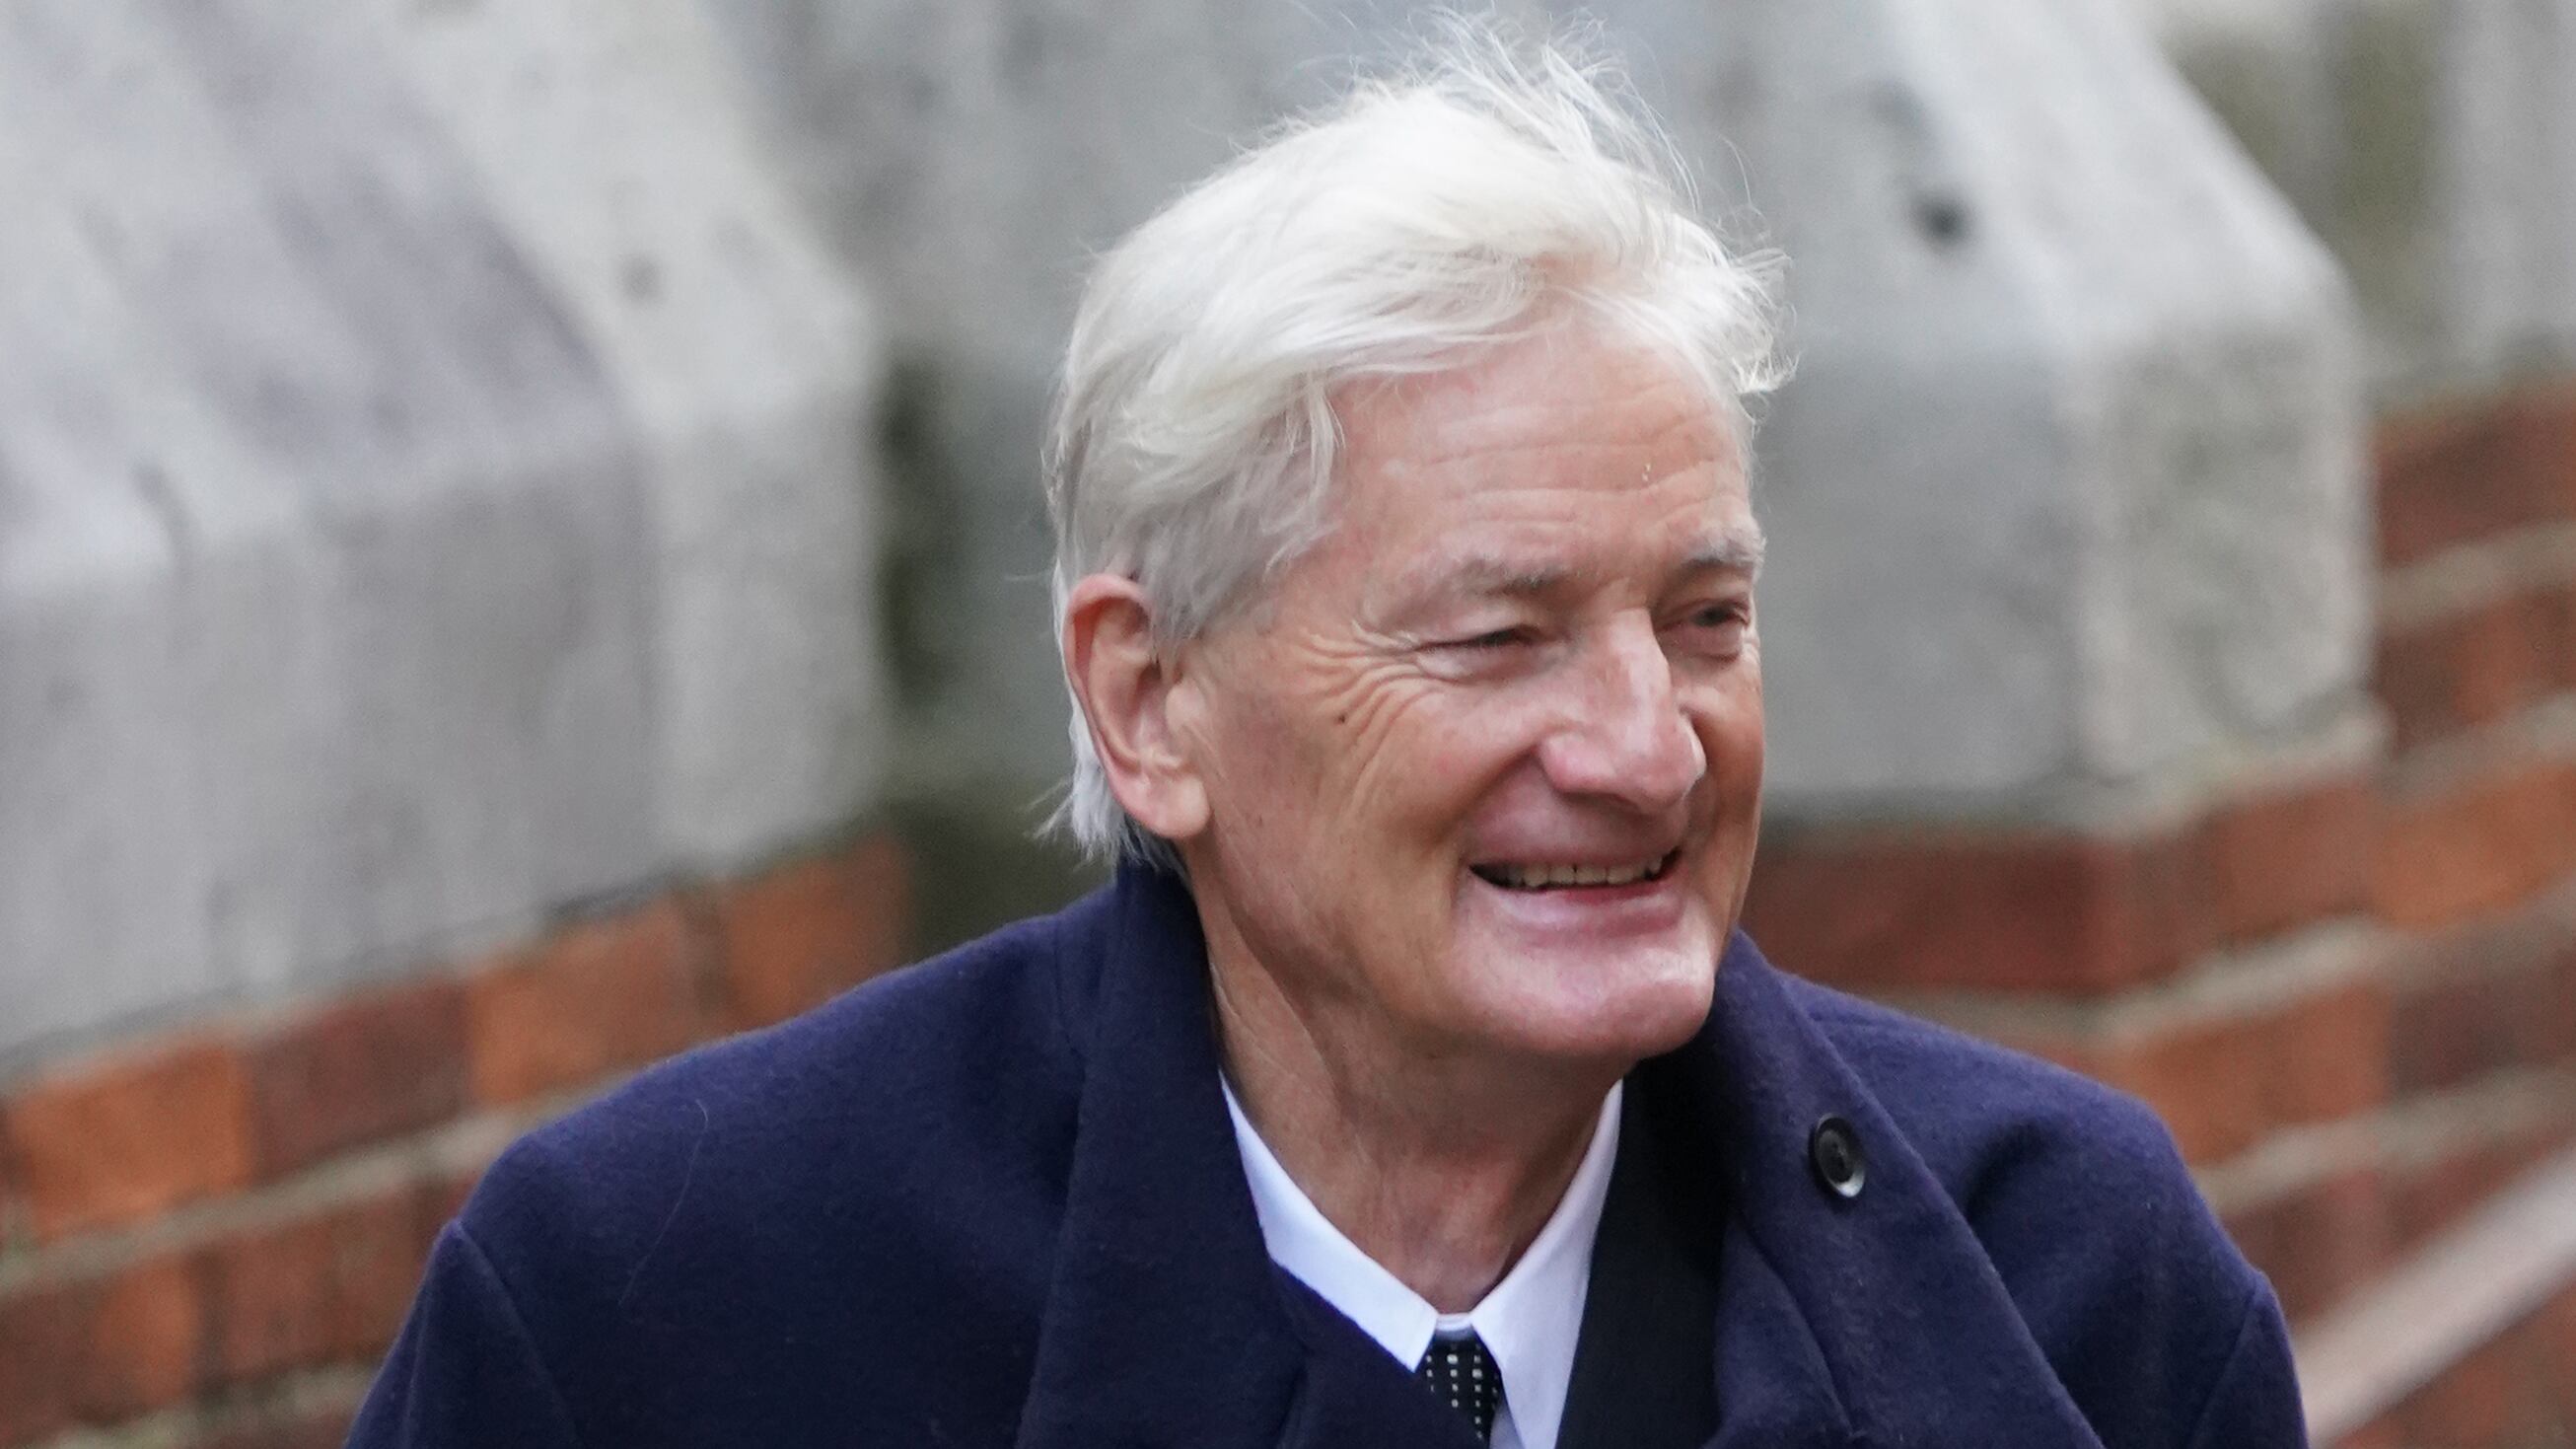 A £6 million donation from Sir James Dyson to his local state primary school has been given the green light by the Government